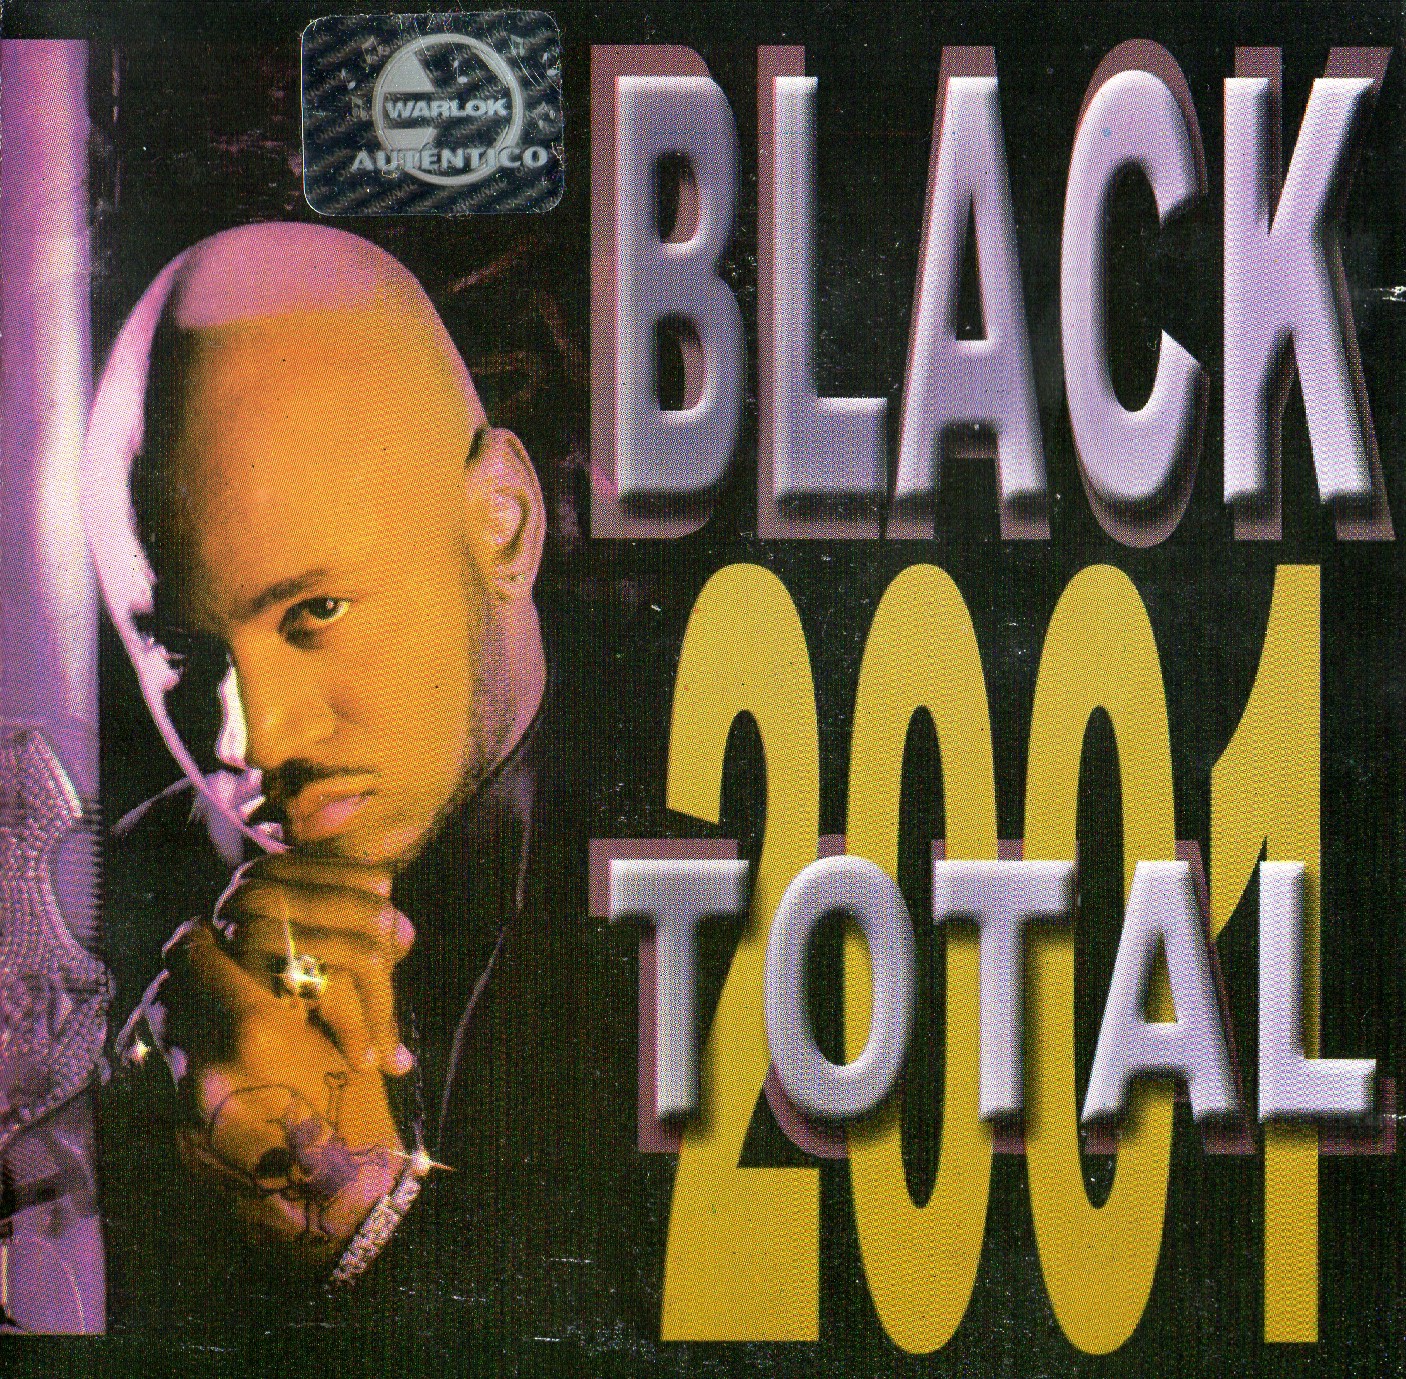 BLACL TOTAL 2001